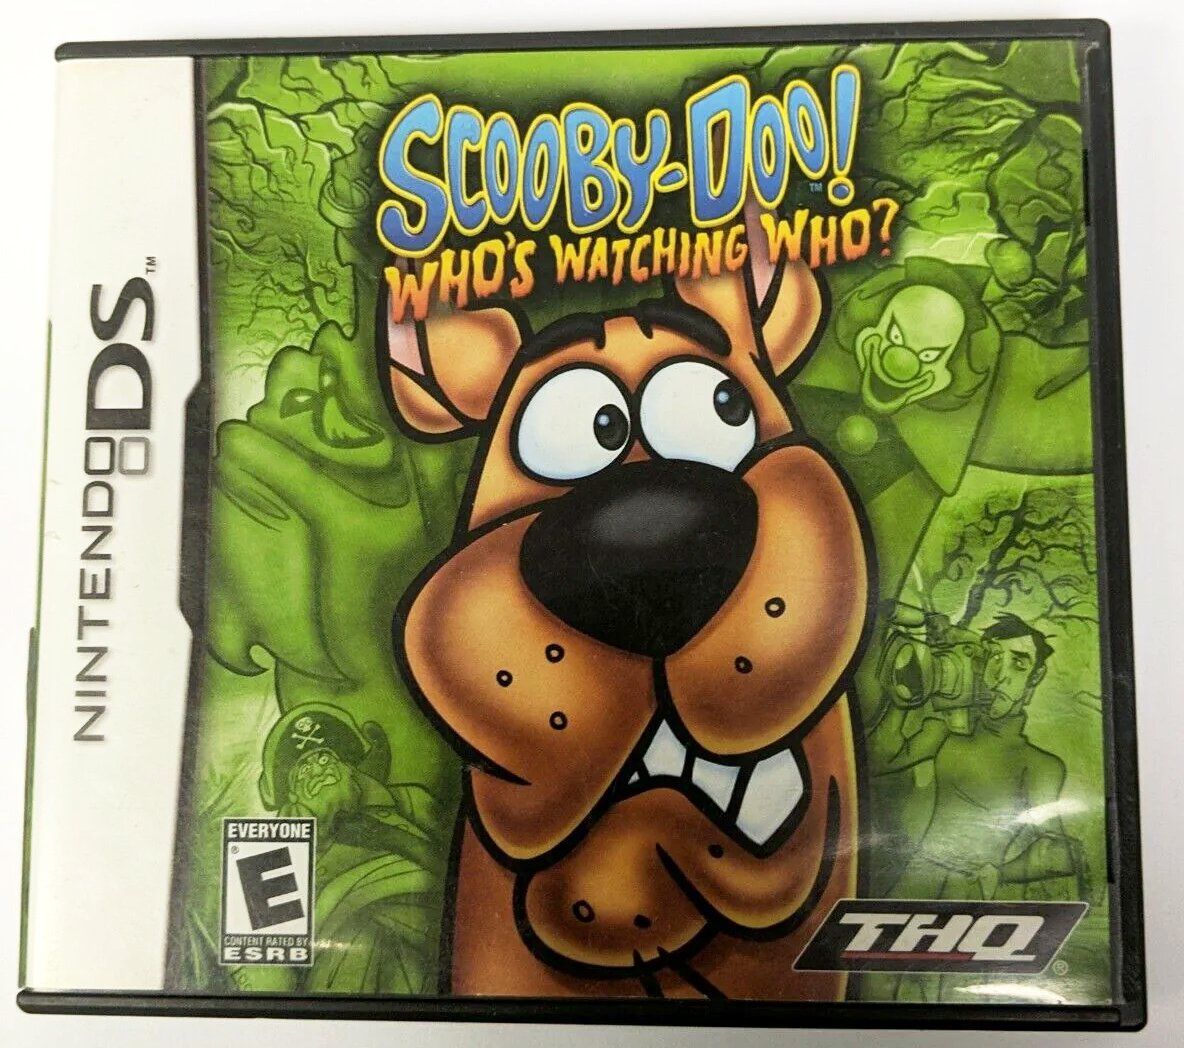 Game | Nintendo DS | Scooby Doo Who's Watching Who